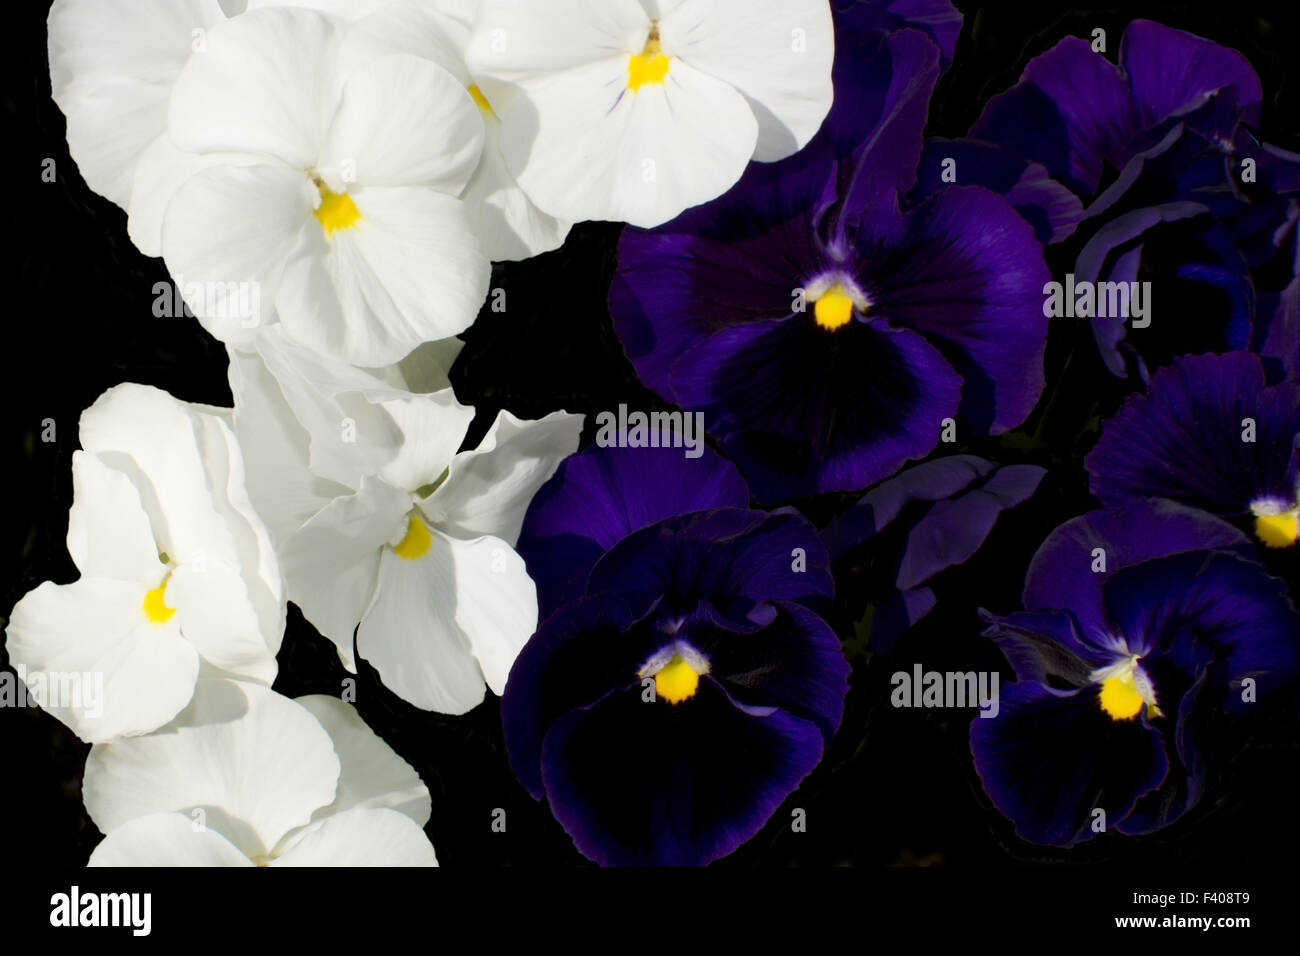 Pansy flower Stock Photo